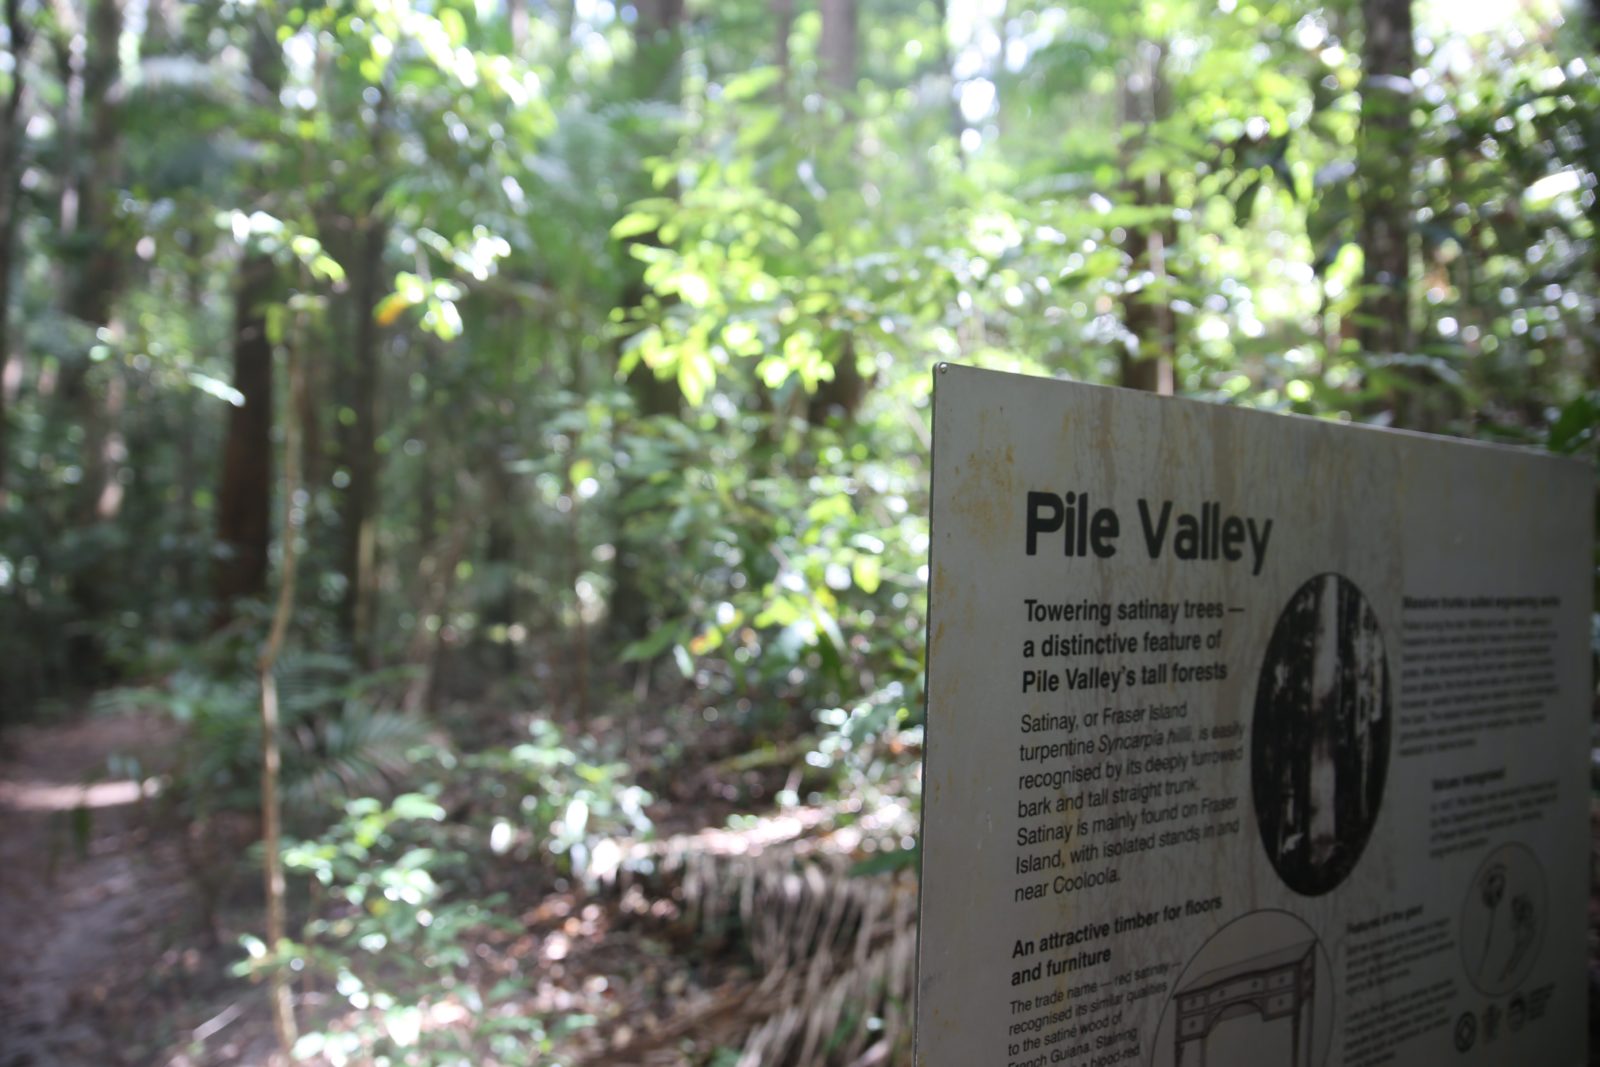 photo showing interpretive sign with information about timber uses for satinay wood.